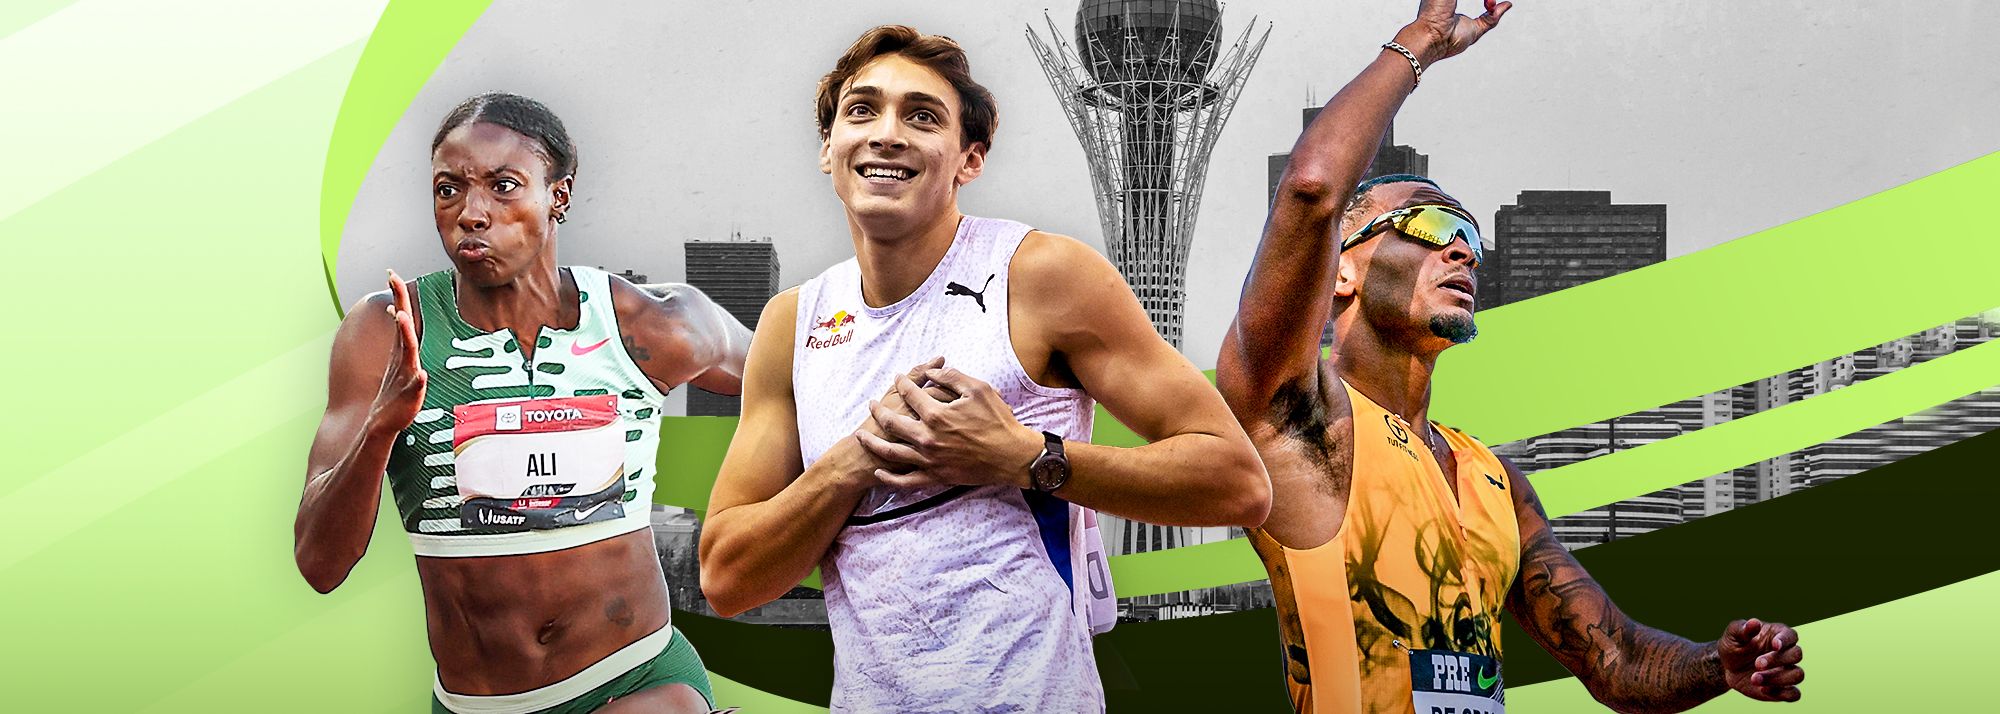 Here's how you can watch and follow the World Athletics Indoor Tour Gold meeting in Astana